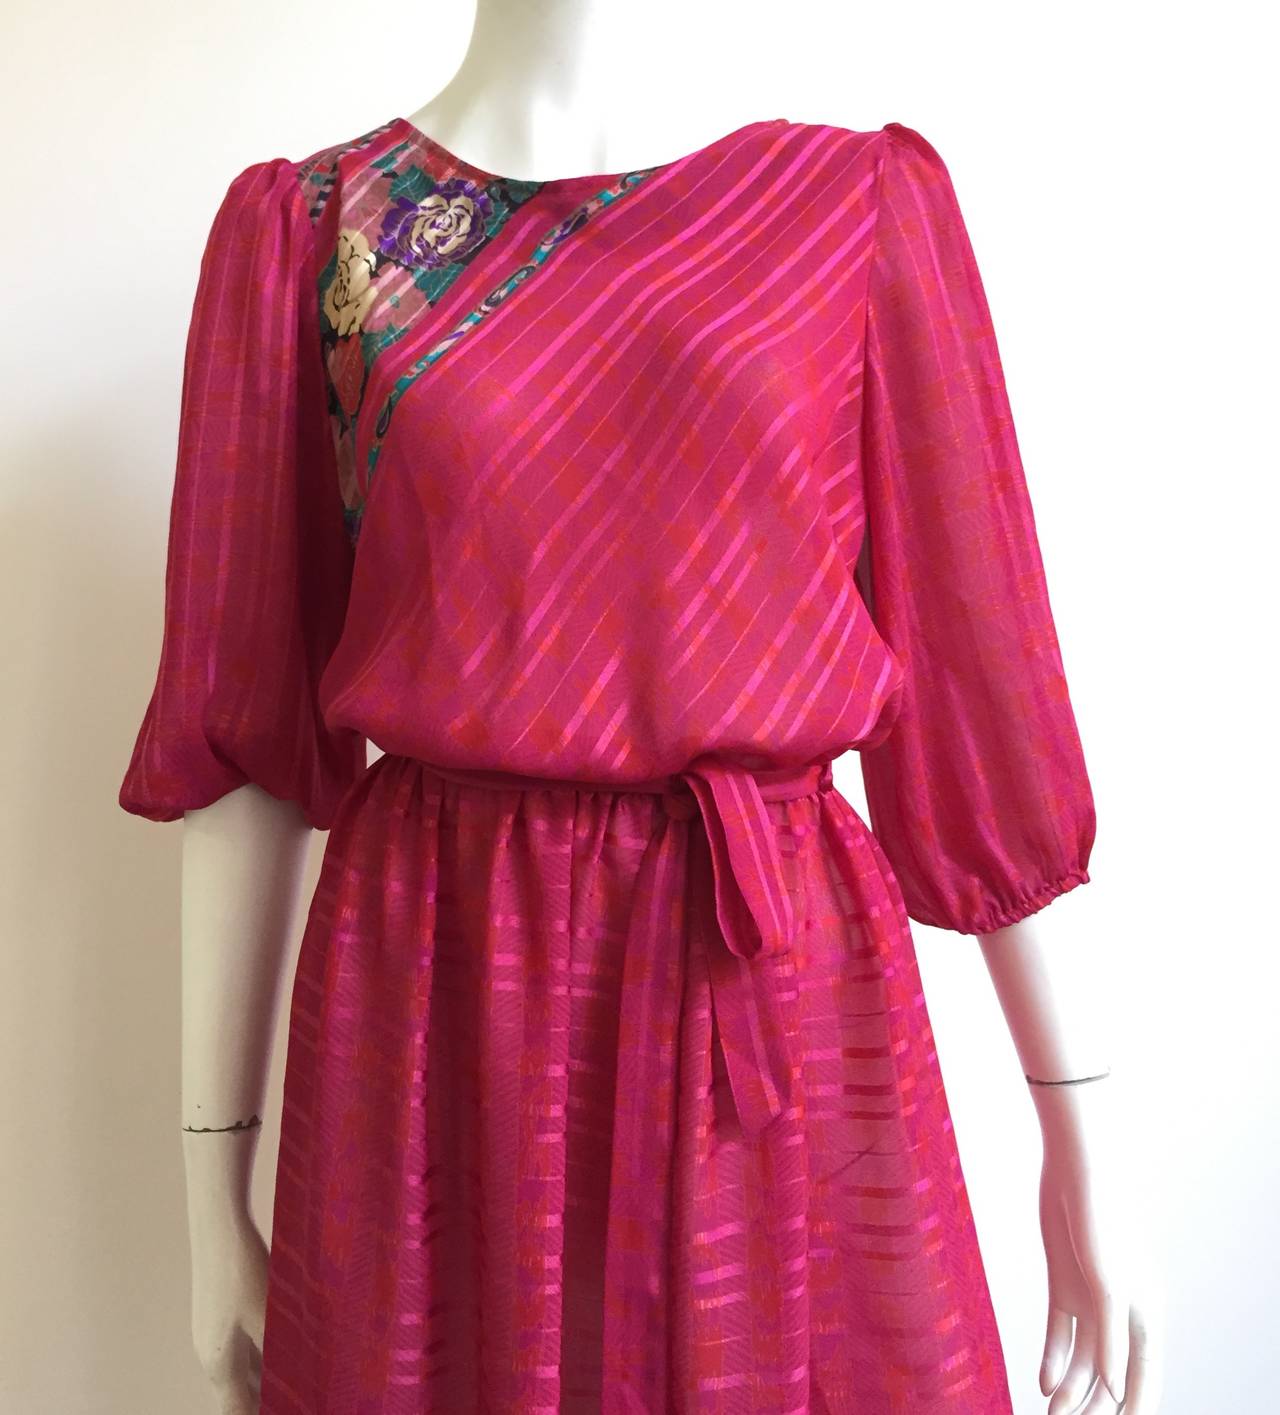 Norman Hartnell 1980s elastic waist band with belt dress.
Original UK dress size 14 but fits like a modern US size 6 (please see & use measurements). Ladies please use your measuring tape so you can measure your bust, waist & hips to make